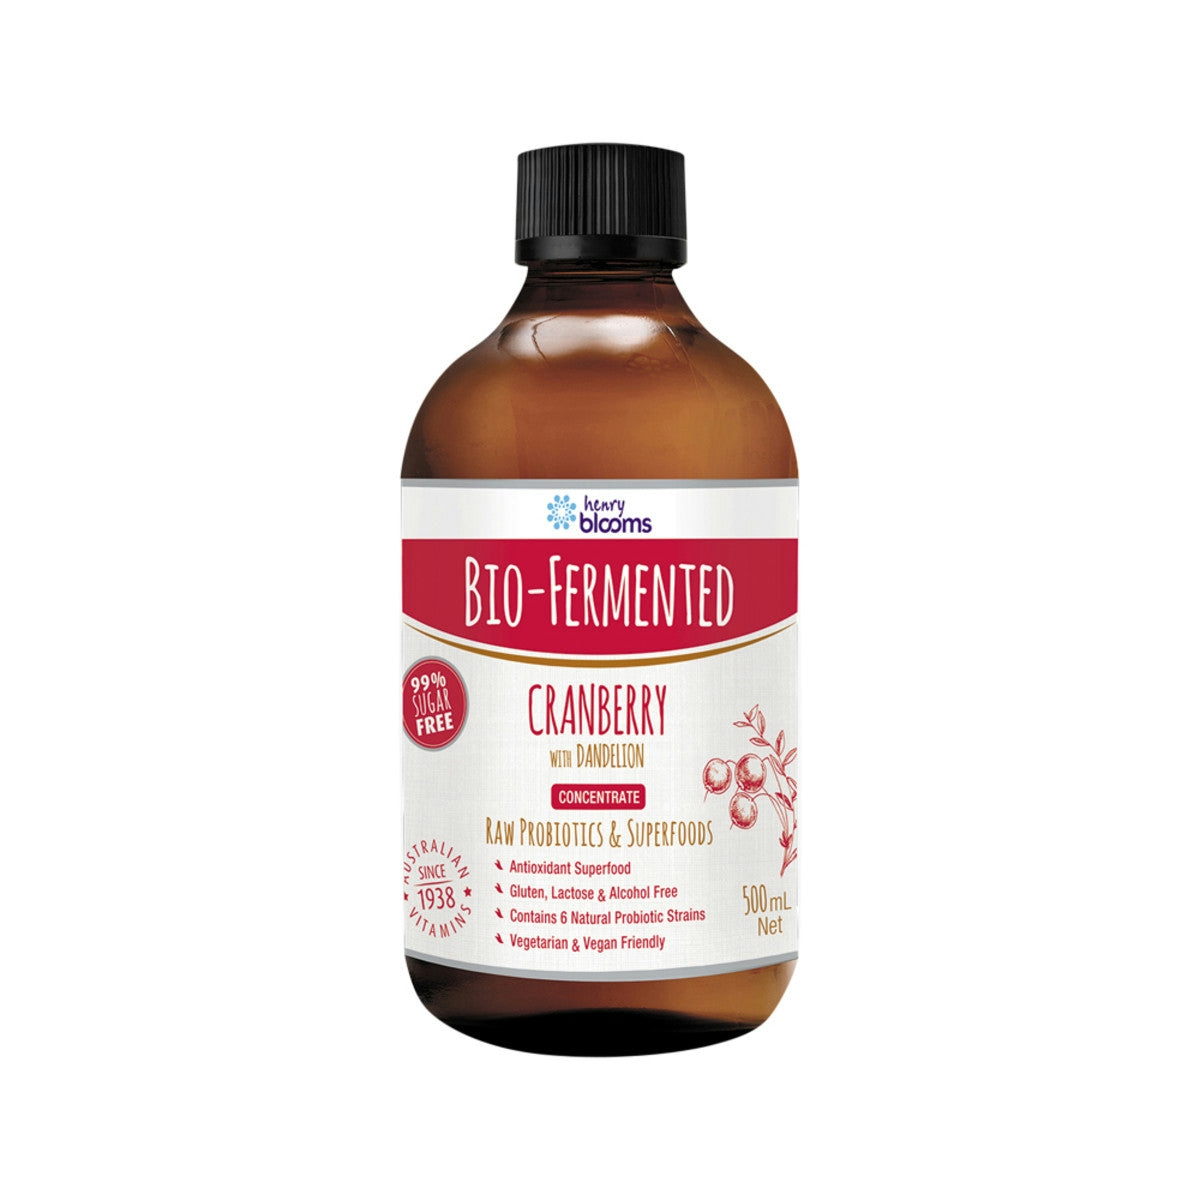 Henry Blooms Bio-Fermented Cranberry Concentrate (with Dandelion) 500ml